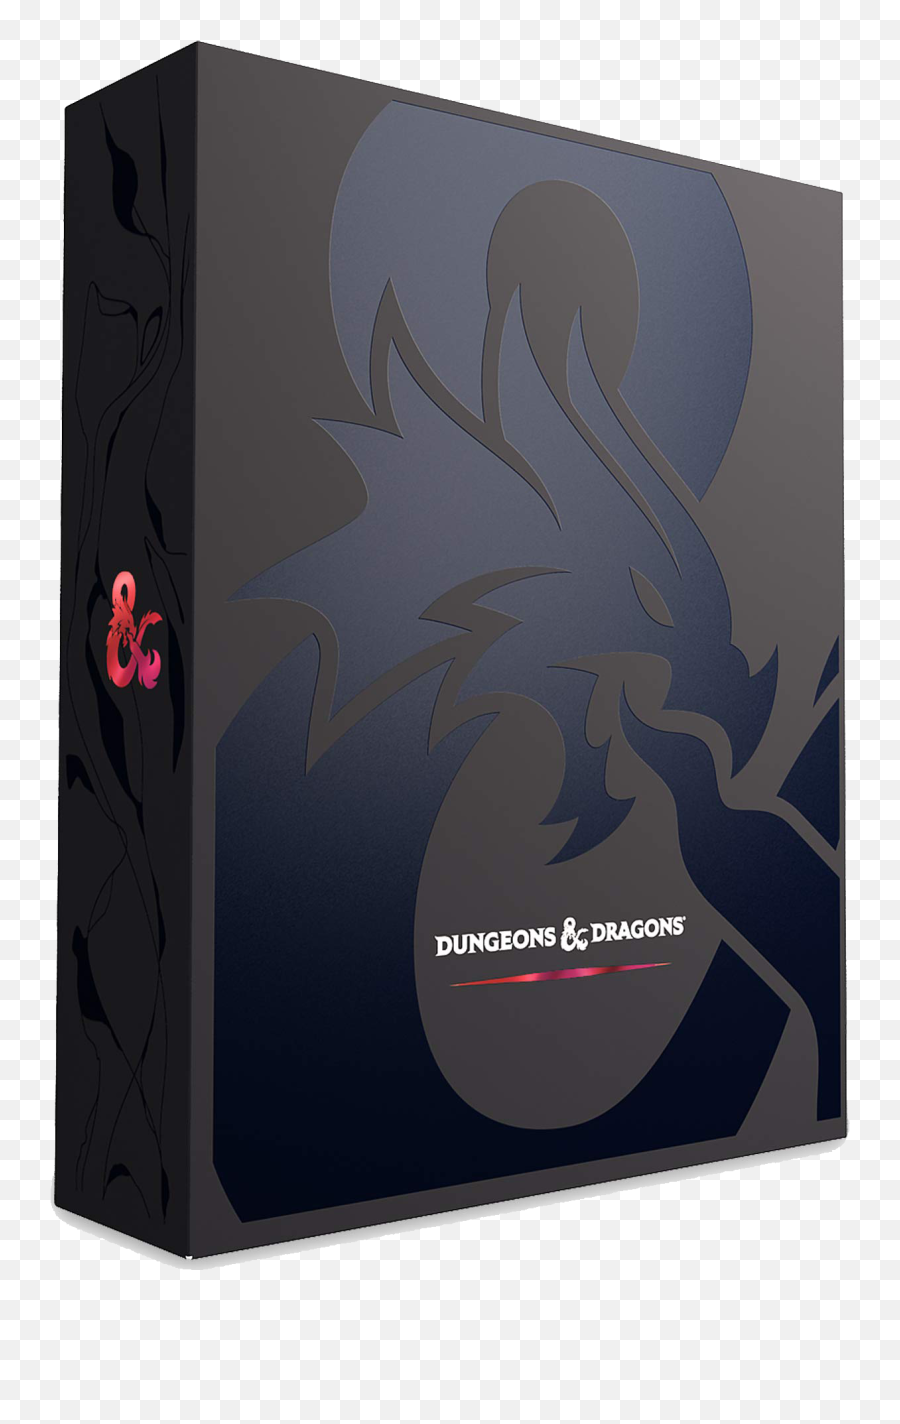 Dungeons And Dragons Core Rulebooks Gift Set 5th Edition U2014 3rd Universe Emoji,Dungeons And Dragons Logo Png